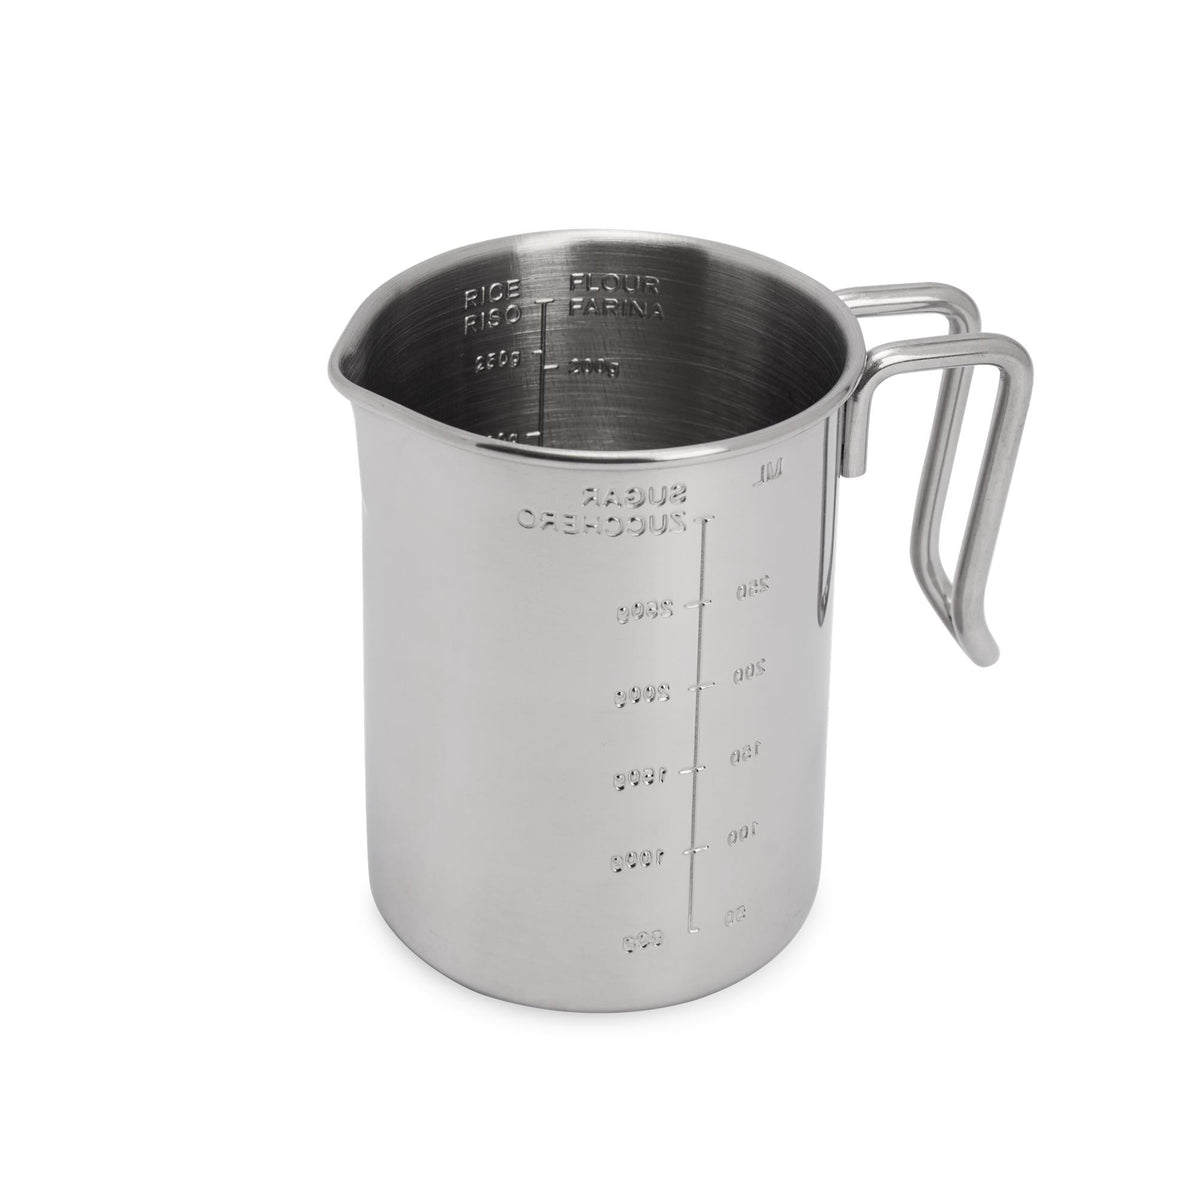  Measuring Cup, Newness Stainless Steel Measuring Cup